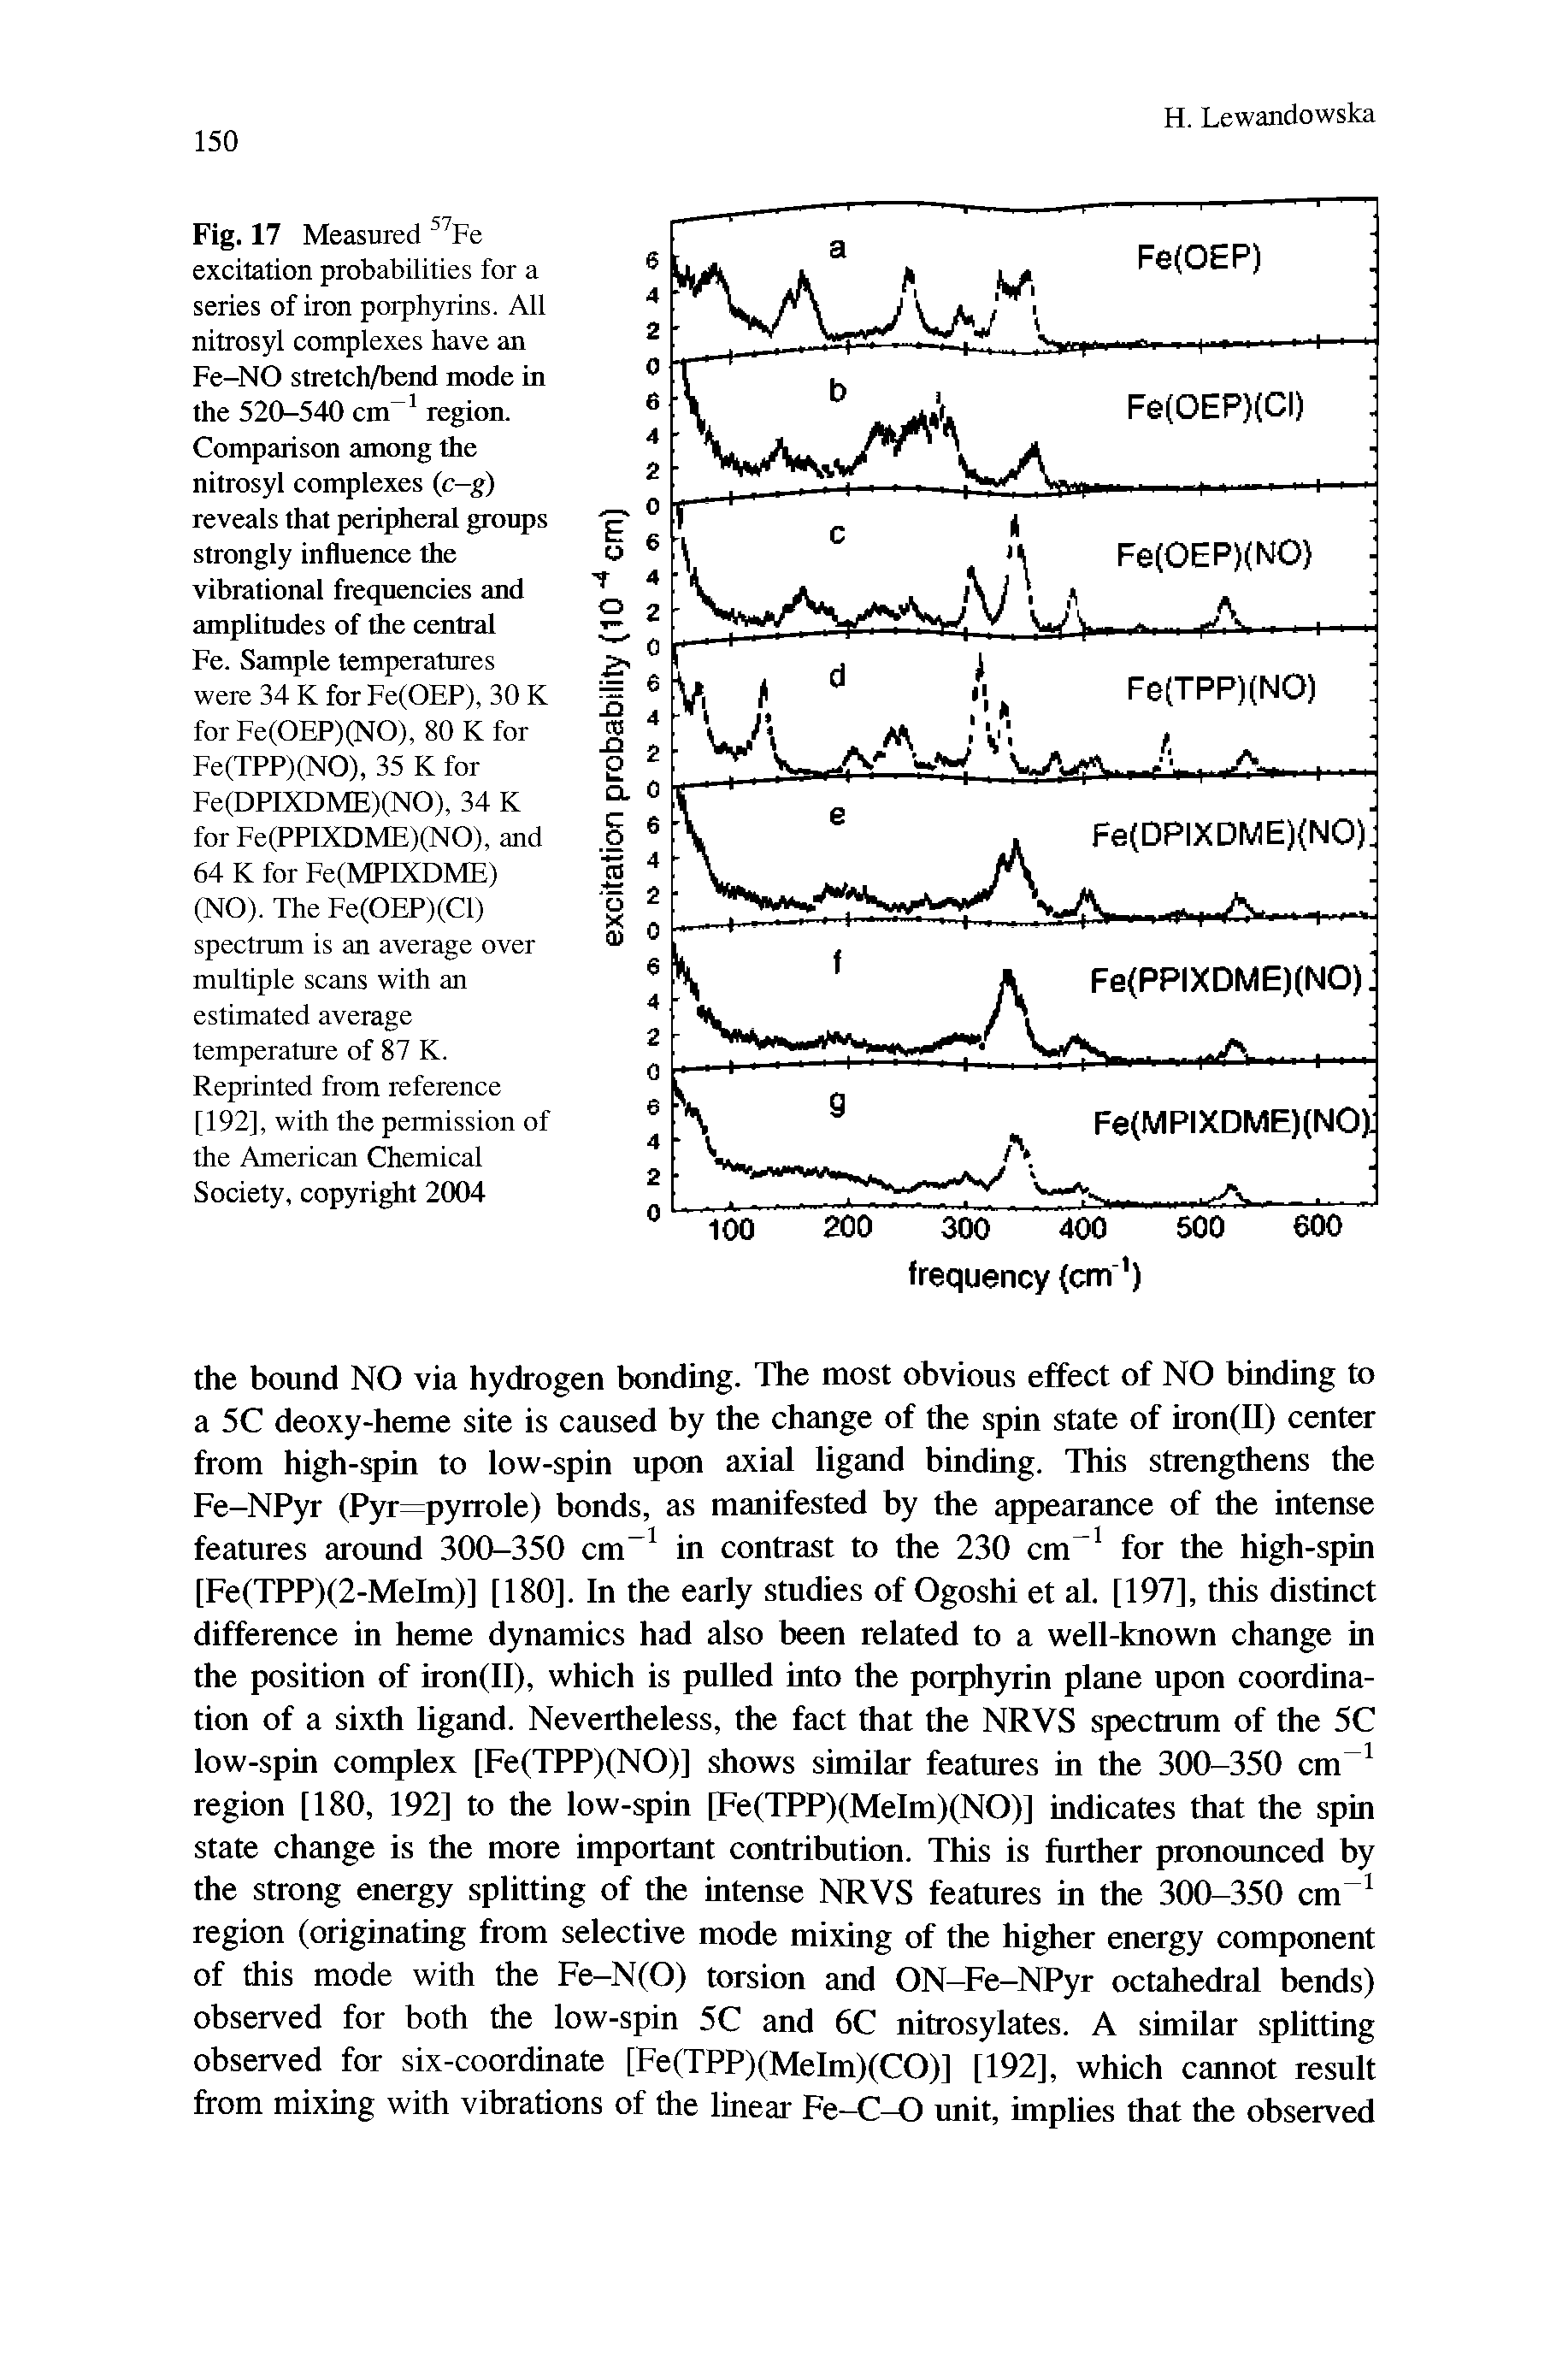 Fig. 17 Measured Fe excitation probabilities for a series of iron porphyrins. All nitrosyl complexes have an Fe-NO stretch/bend mode in the 520-540 cm region. Comparison among the nitrosyl complexes (c-g) reveals that peripheral groups strongly influence the vibrational frequencies and amplitudes of the central Fe. Sample temperatures were 34 K for Fe(OEP), 30 K for Fe(OEP)(NO), 80 K for Fe(TPP)(NO), 35 K for Fe(DPIXDME)(NO), 34 K forFe(PPIXDME)(NO), and 64 K for Fe(MPIXDME) (NO). The Fe(OEP)(Cl) spectrum is an average over multiple scans with an estimated average temperature of 87 K. Reprinted from reference [192], with the permission of the American Chemical Society, copyright 2004...